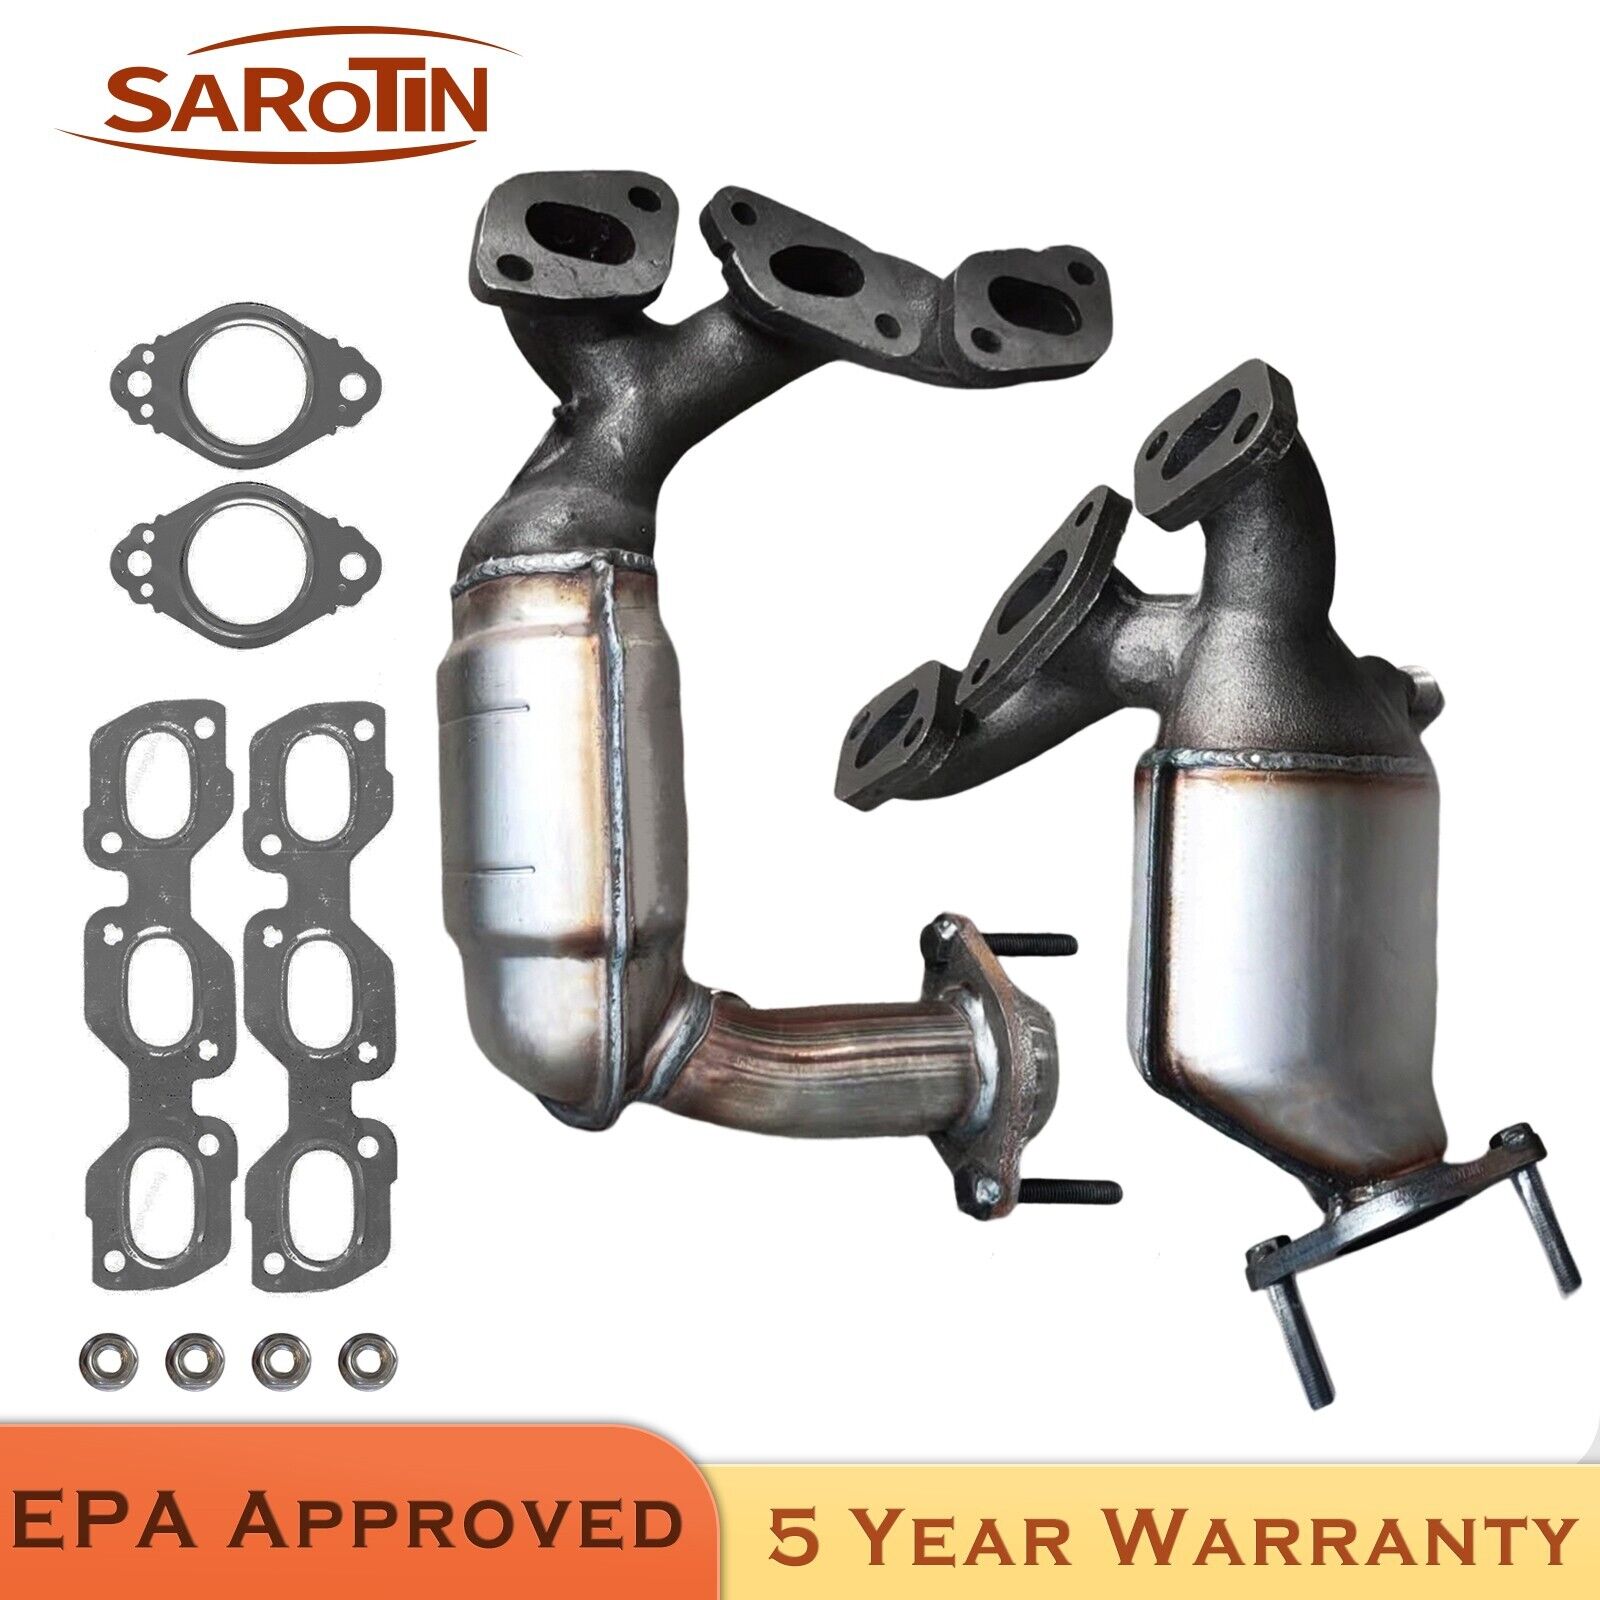 Exhaust Catalytic Converter Manifold for 01 - 06 Ford Escape Mazda Tribute 3.0L